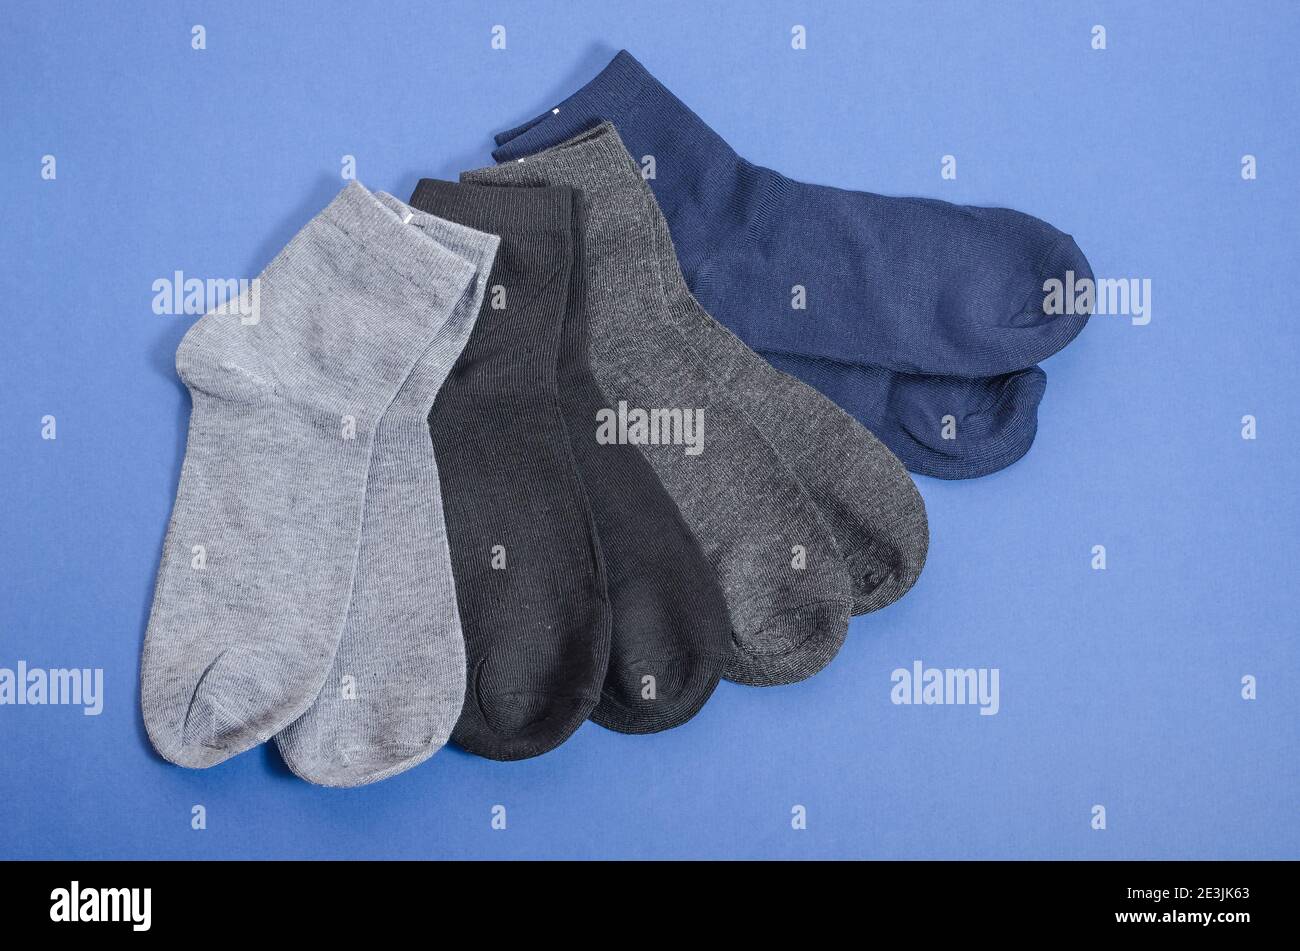 Classic mens multicolored socks on a blue background, mens clothing. Stock Photo